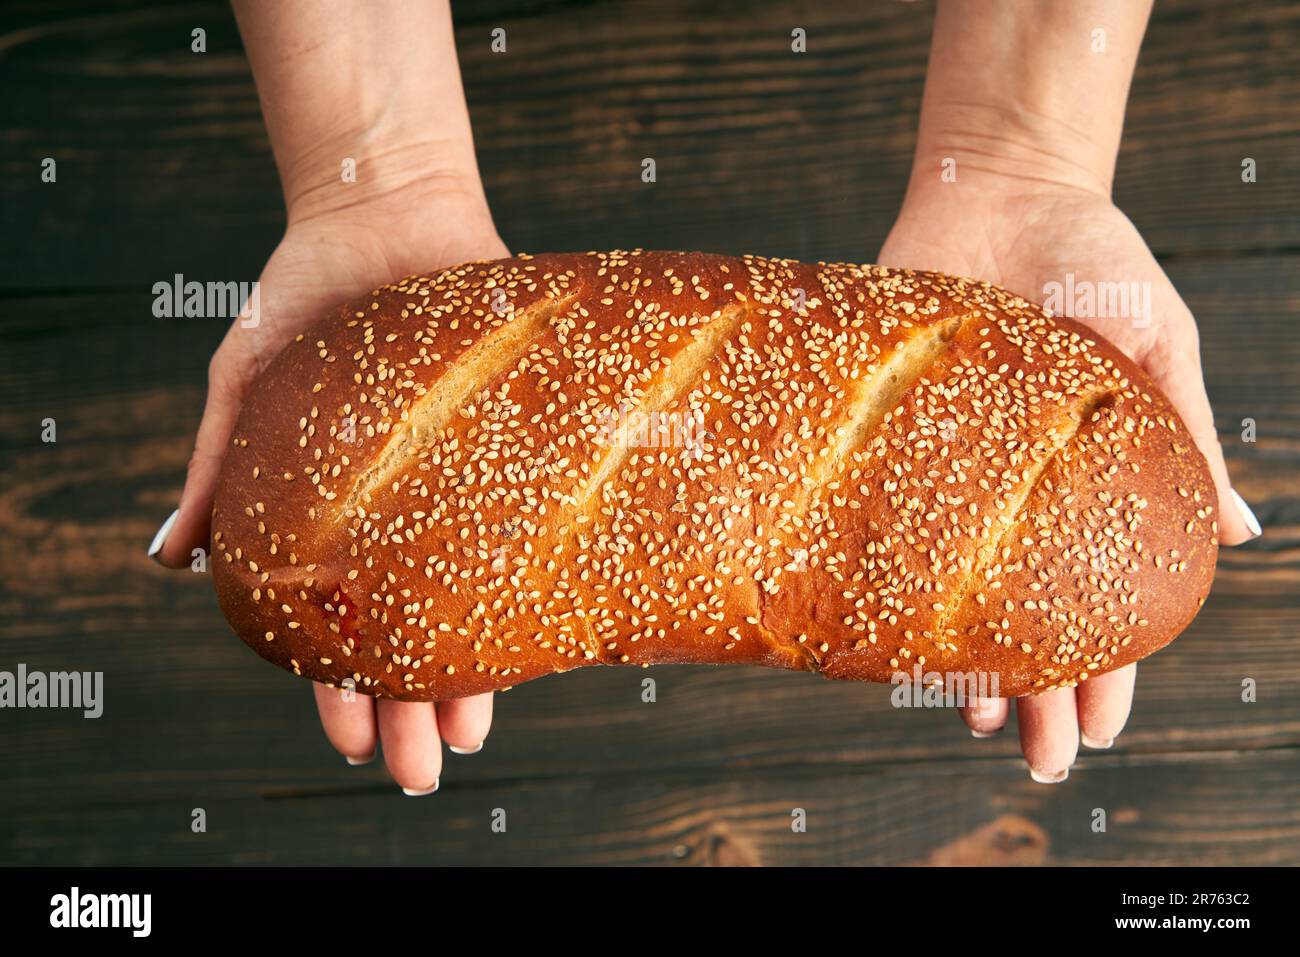 Loaf of fresh made white bread in woman hands on wooden table background. Bakery, food concept Stock Photo